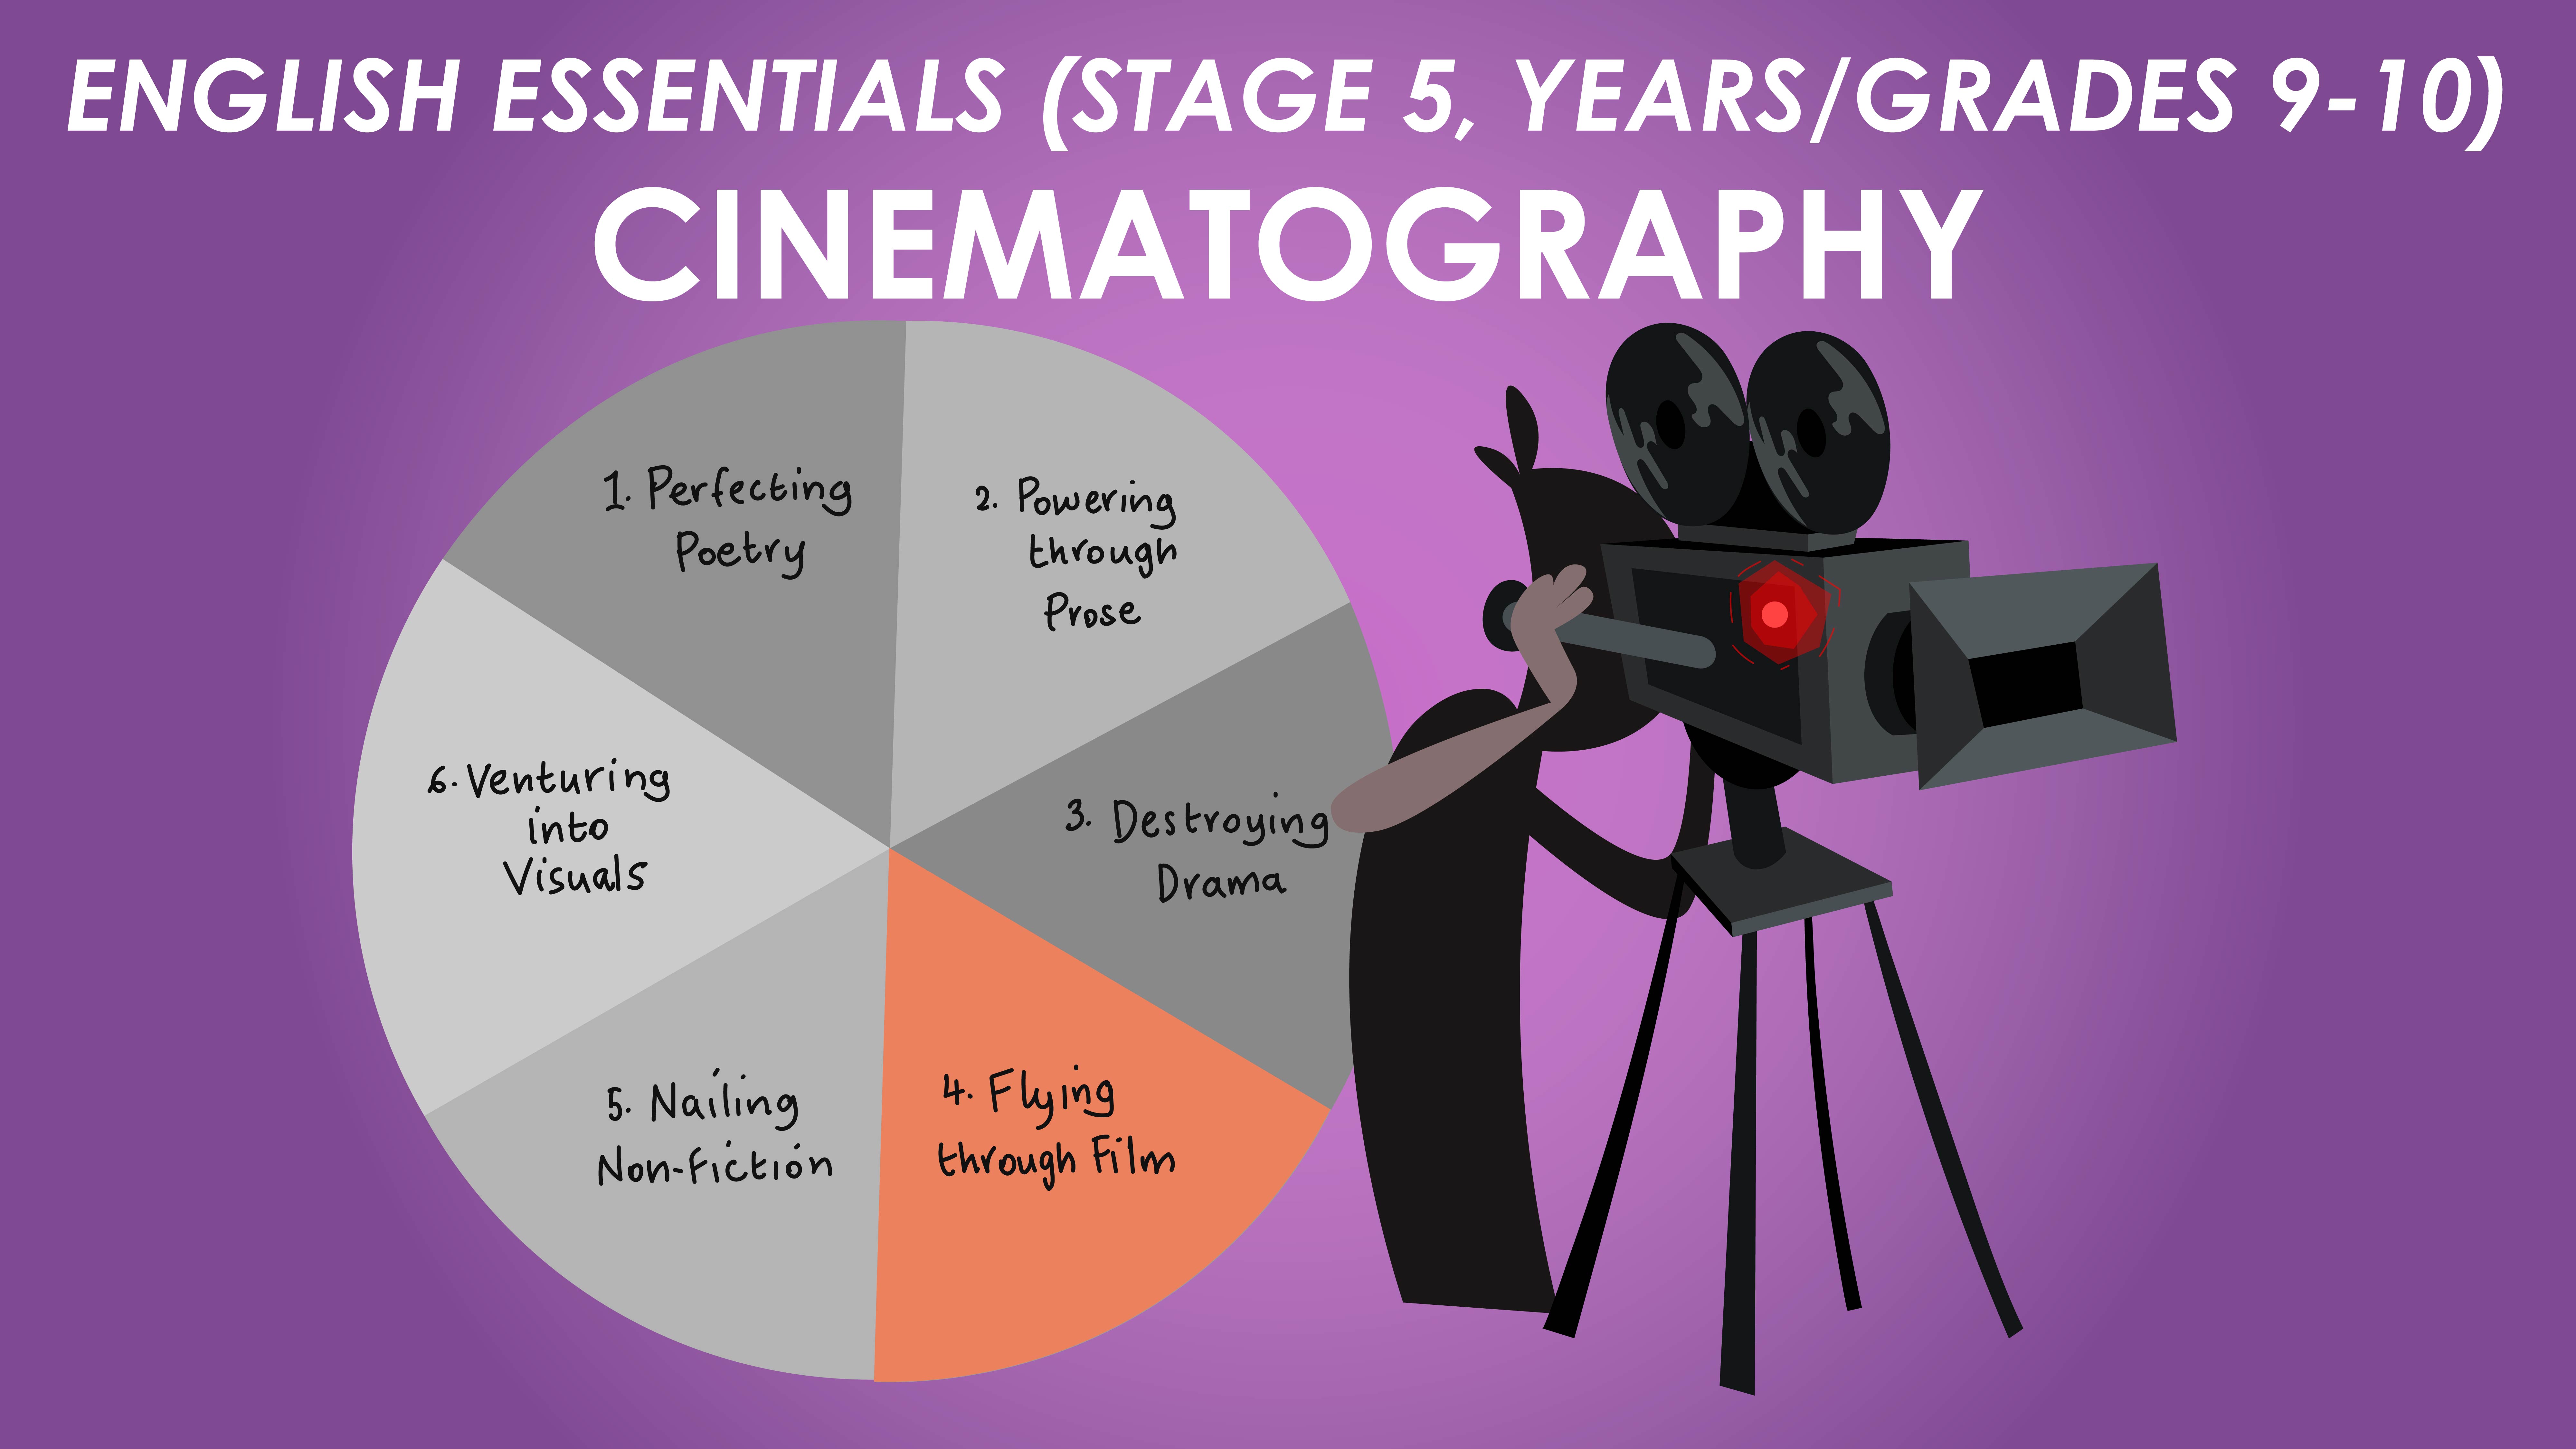 English Essentials - Flying Through Film - Cinematography (Stage 5, Years/Grades 9-10)